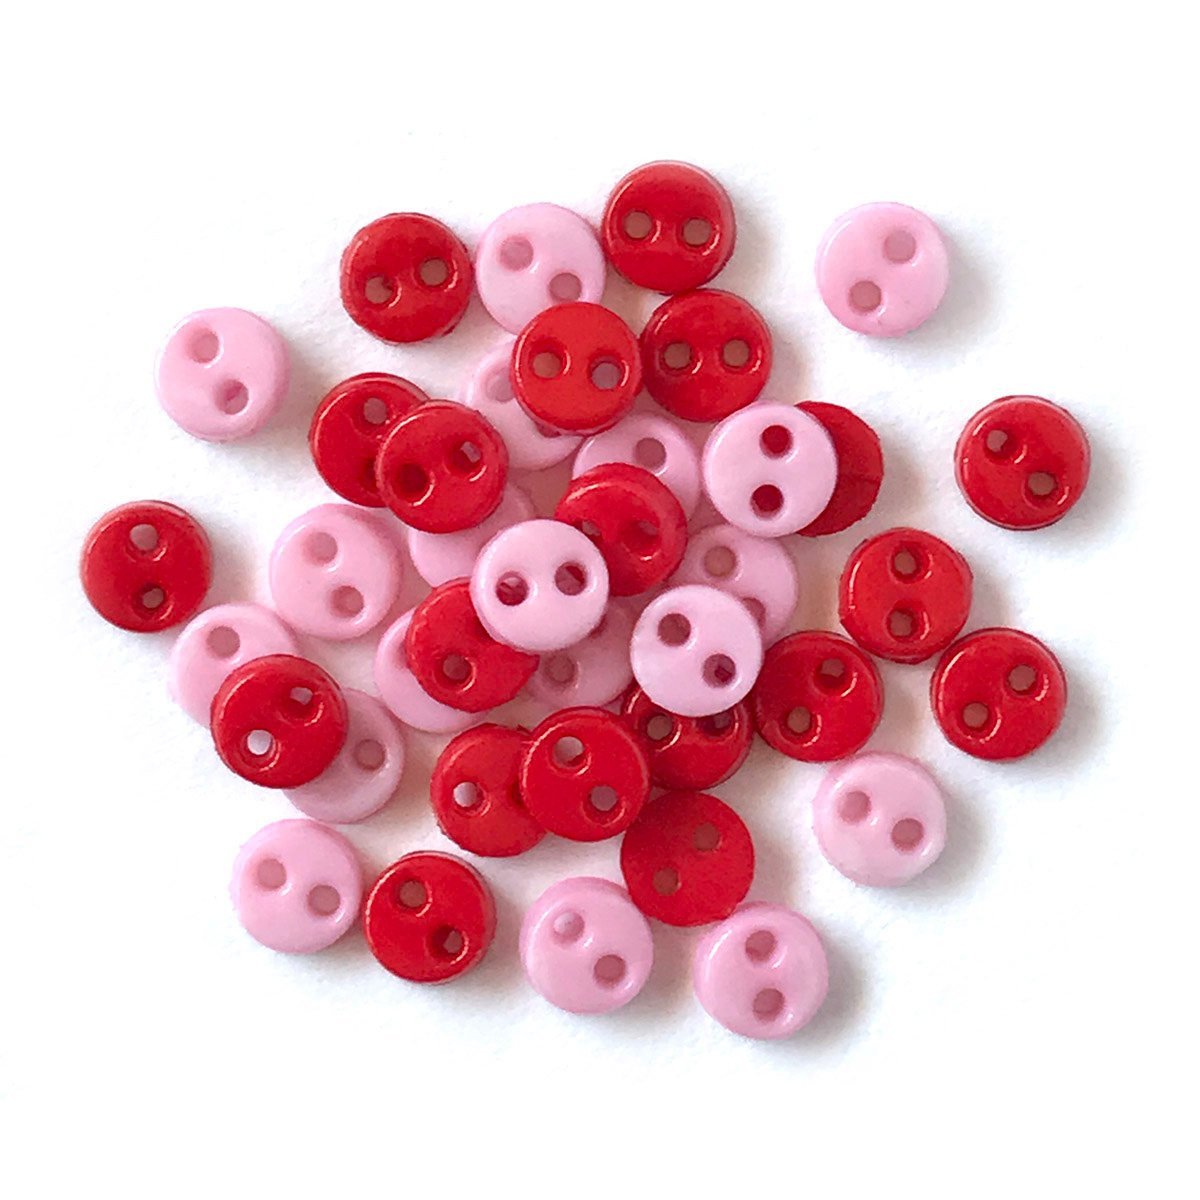 YUEARN 120pcs Small Buttons for Crafts, 18mm Small Bottons Resin